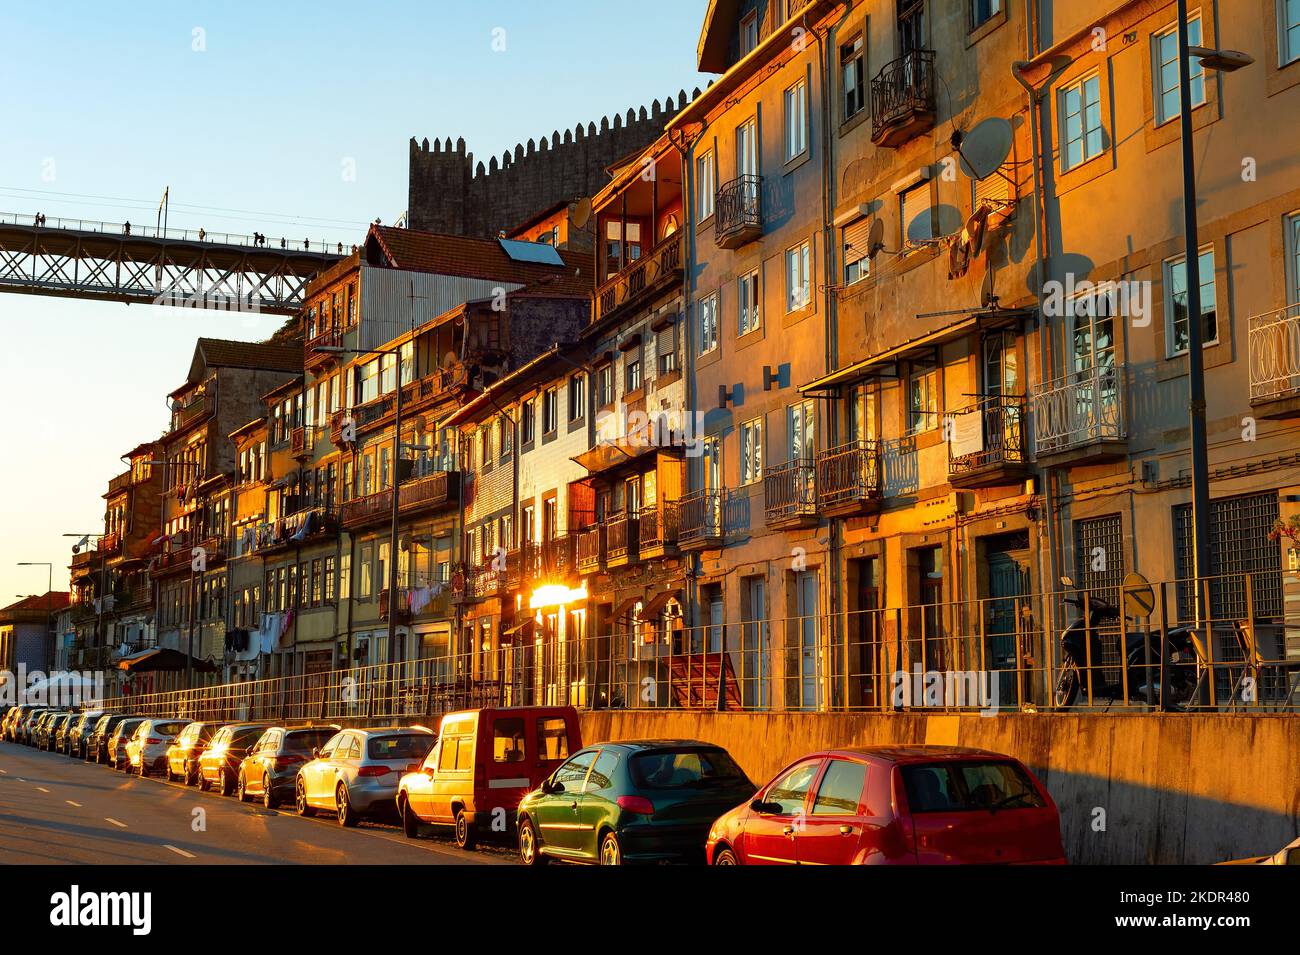 Sunset light reflects on fcades of traditional houses, parked cars, Dom Luis bridge, cityscape Porto, Portugal Stock Photo